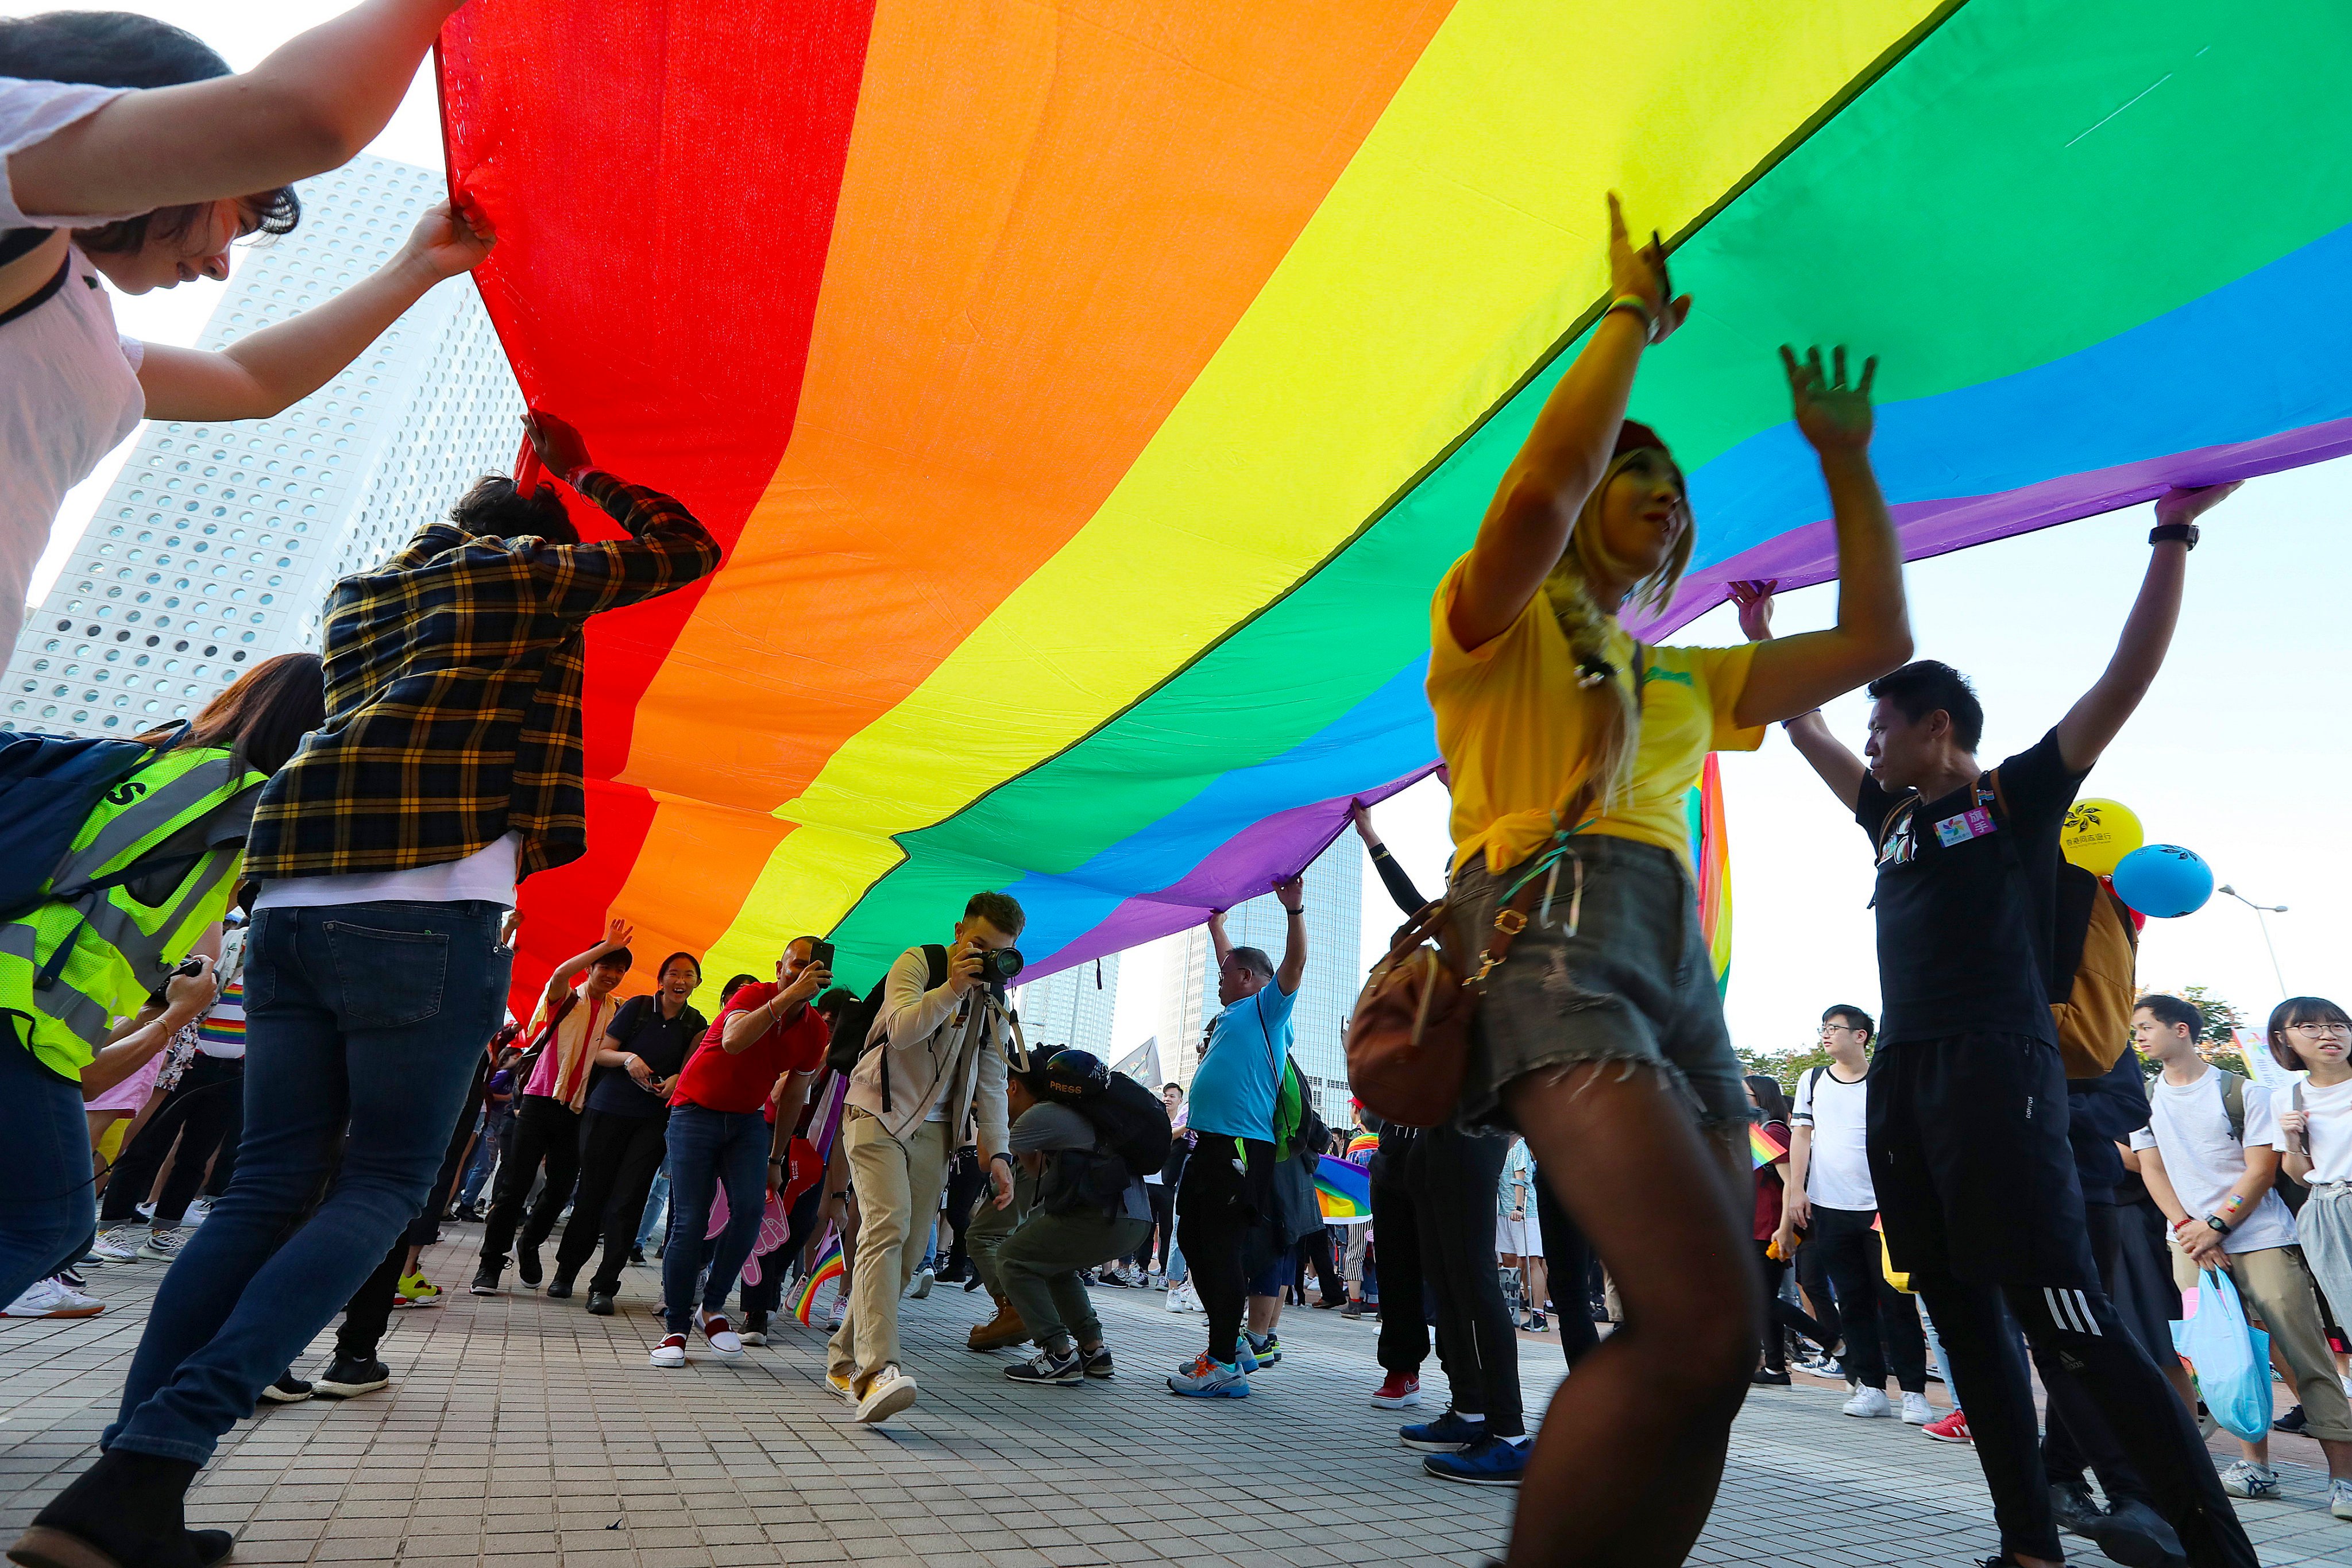 The Pride Parade is held in 2019. Some LGBTQ activists in Hong Kong have called for the Gay Games to be cancelled. Photo: Felix Wong